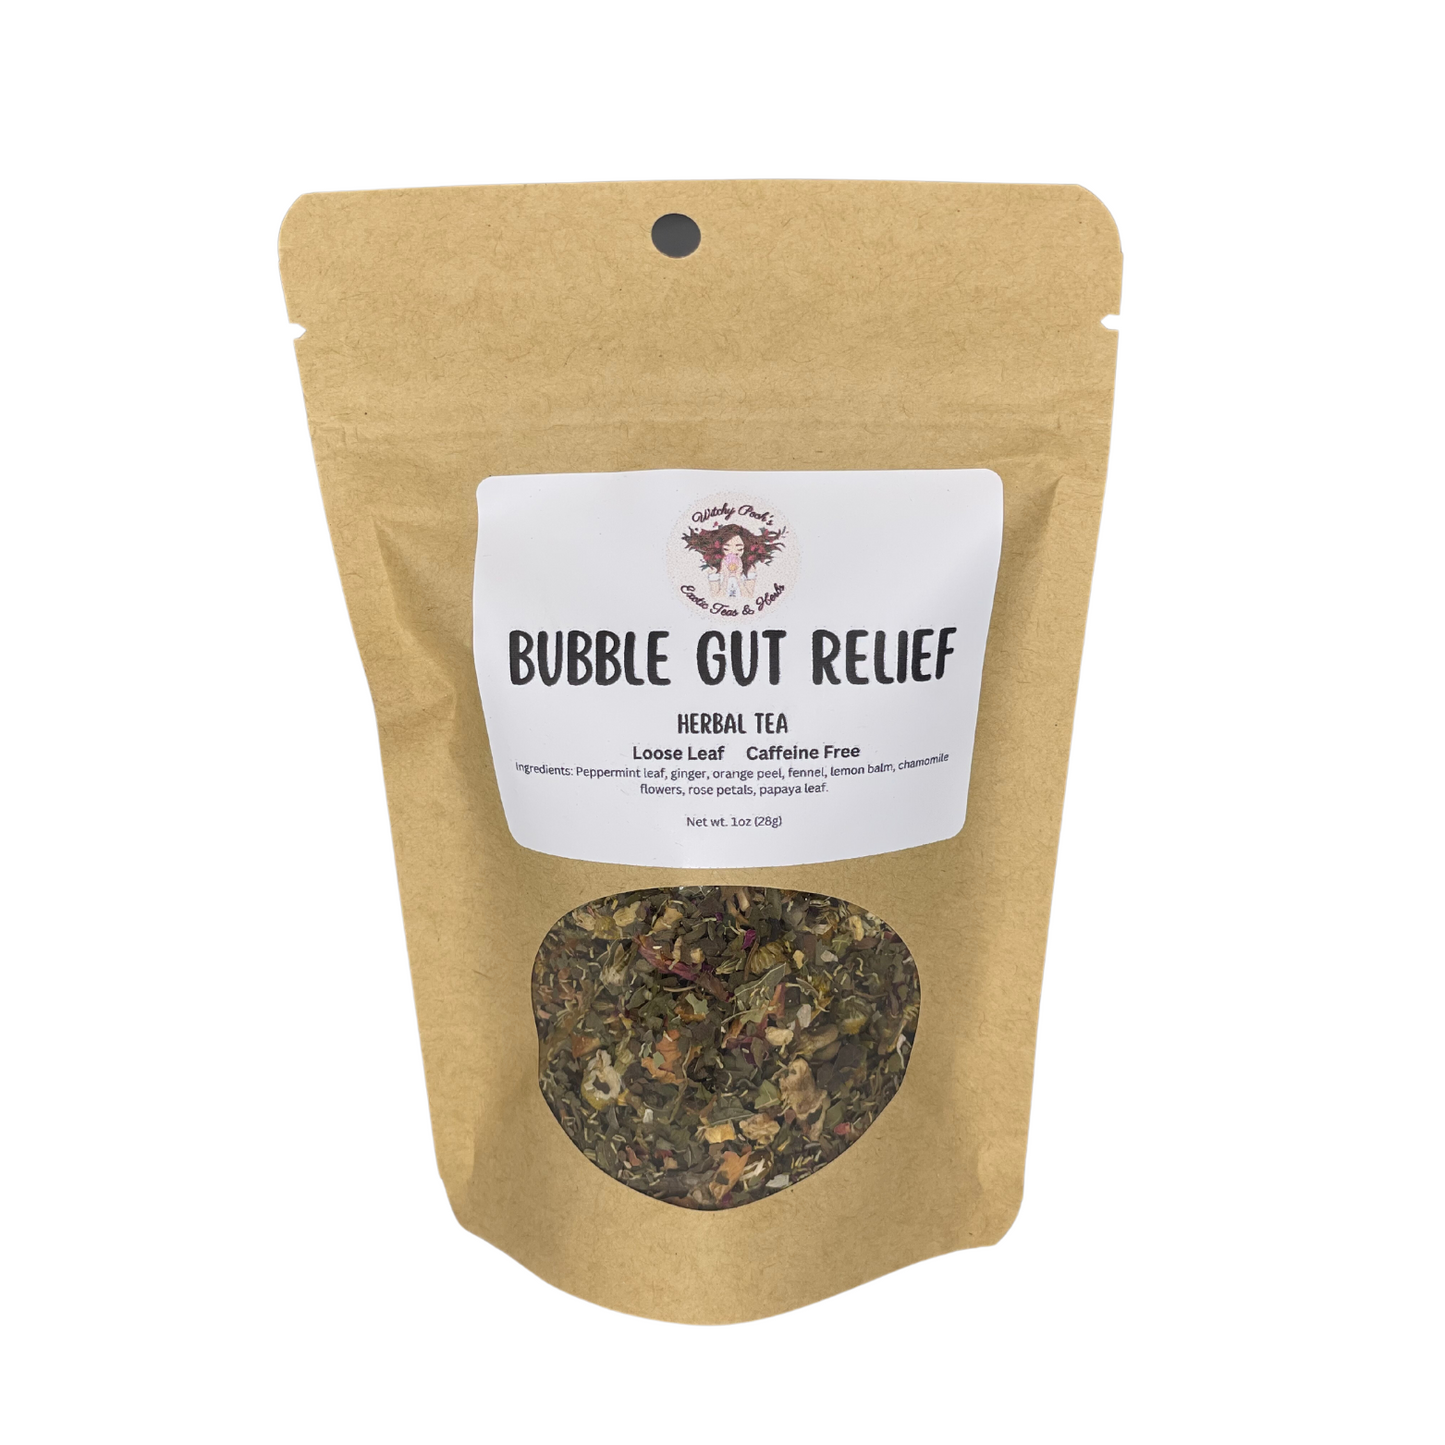 Witchy Pooh's Bubble Gut Relief Loose Leaf Herbal Functional Tea, Caffeine Free, For Digestive Issues